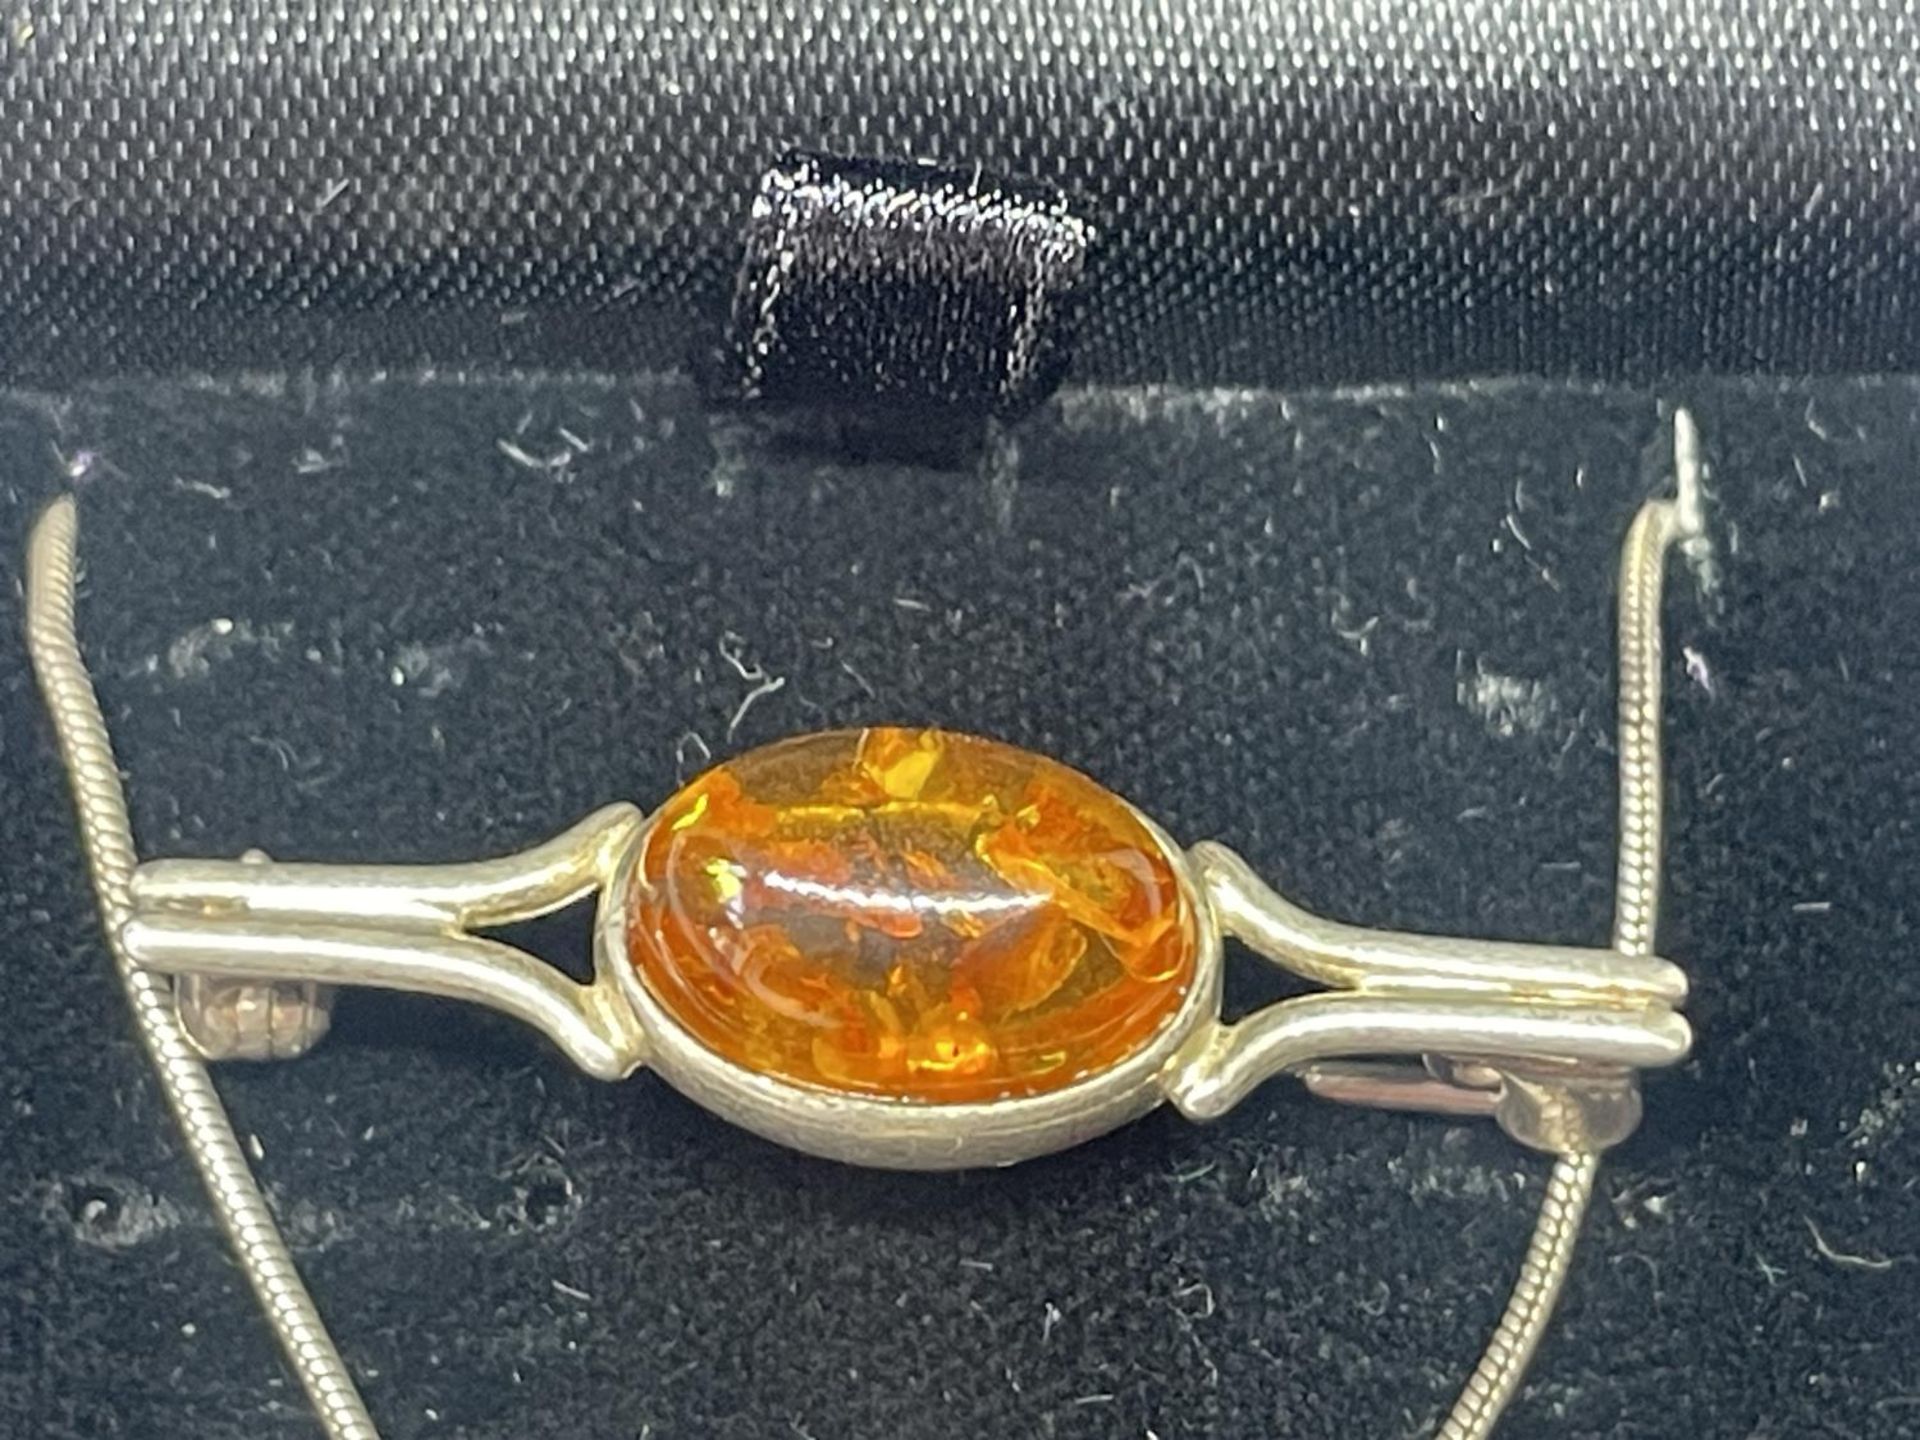 A SILVER AND AMBER NECKLACE AND BROOCH IN A PRESENTATION BOX - Image 2 of 3